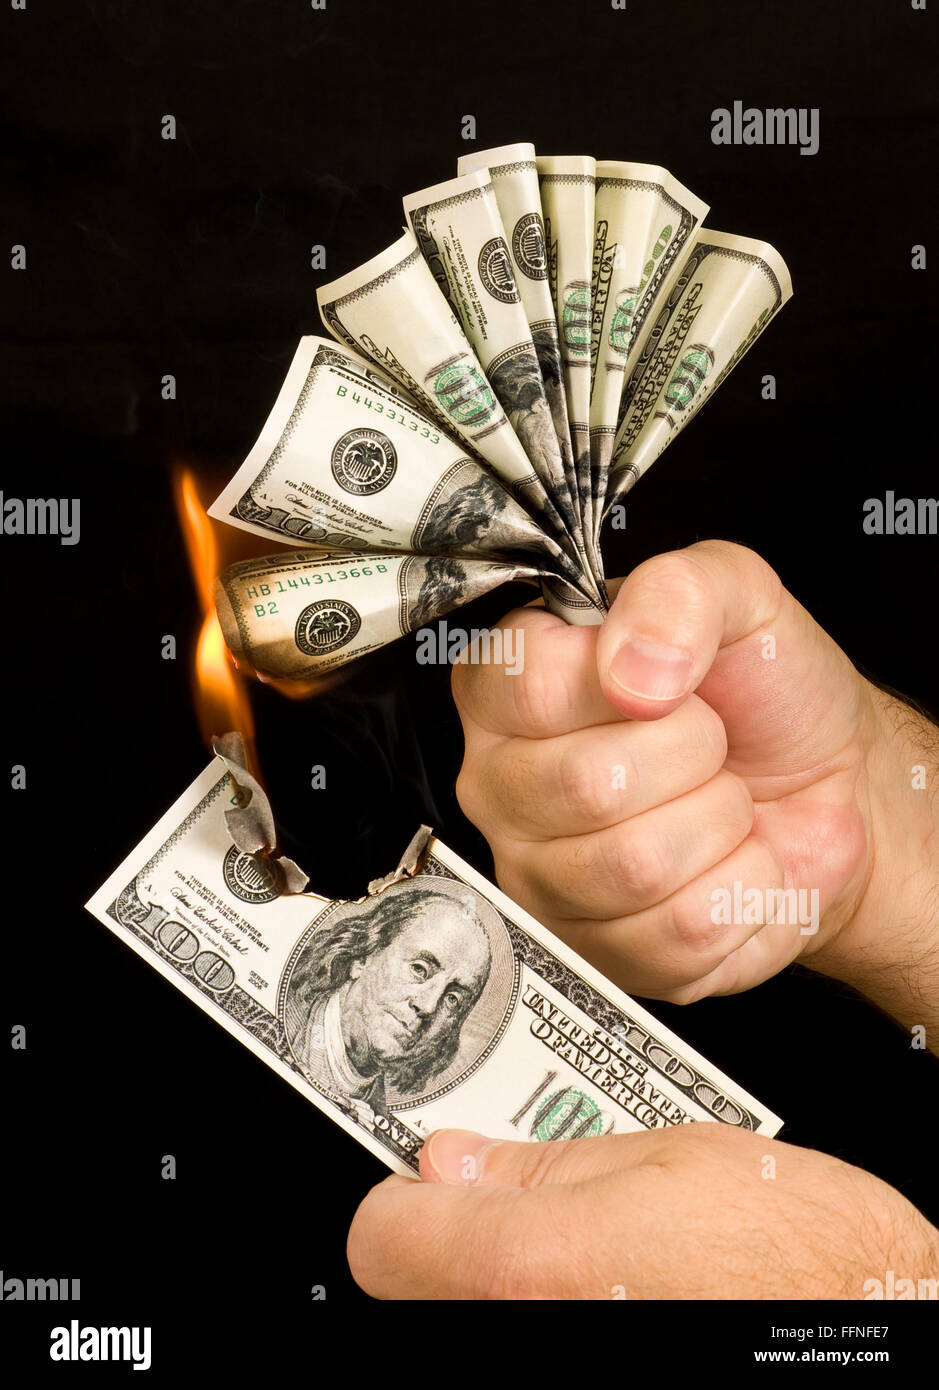 Money to Burn.  A man uses a one hundred dollar bill to set fire to the hand full of one hundred dollar bills in his other hand. Stock Photo